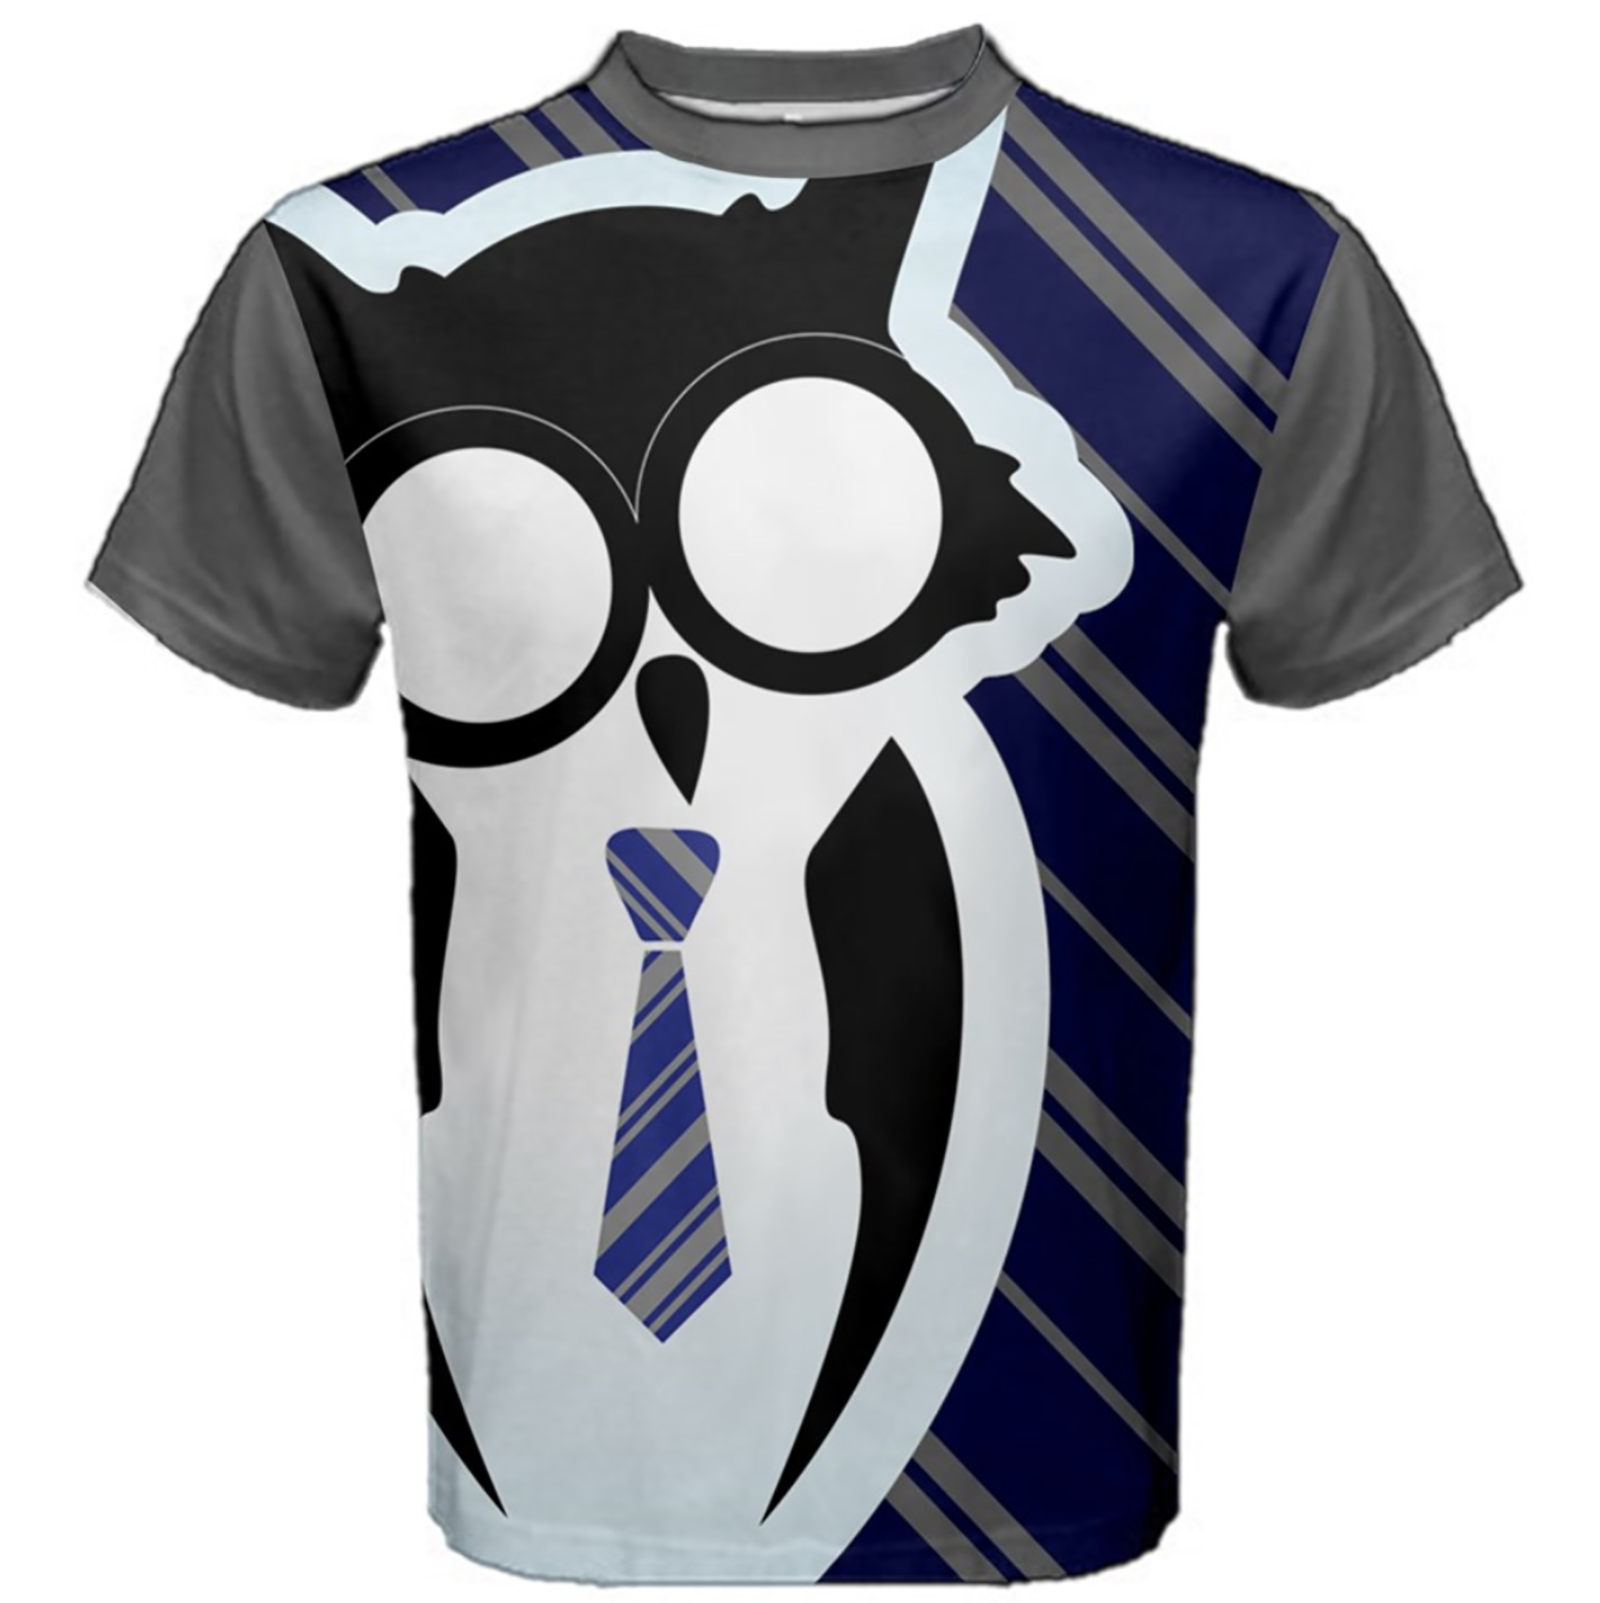 Owl Striped (Unisex) Cotton Tee - Inspired by Ravenclaw House